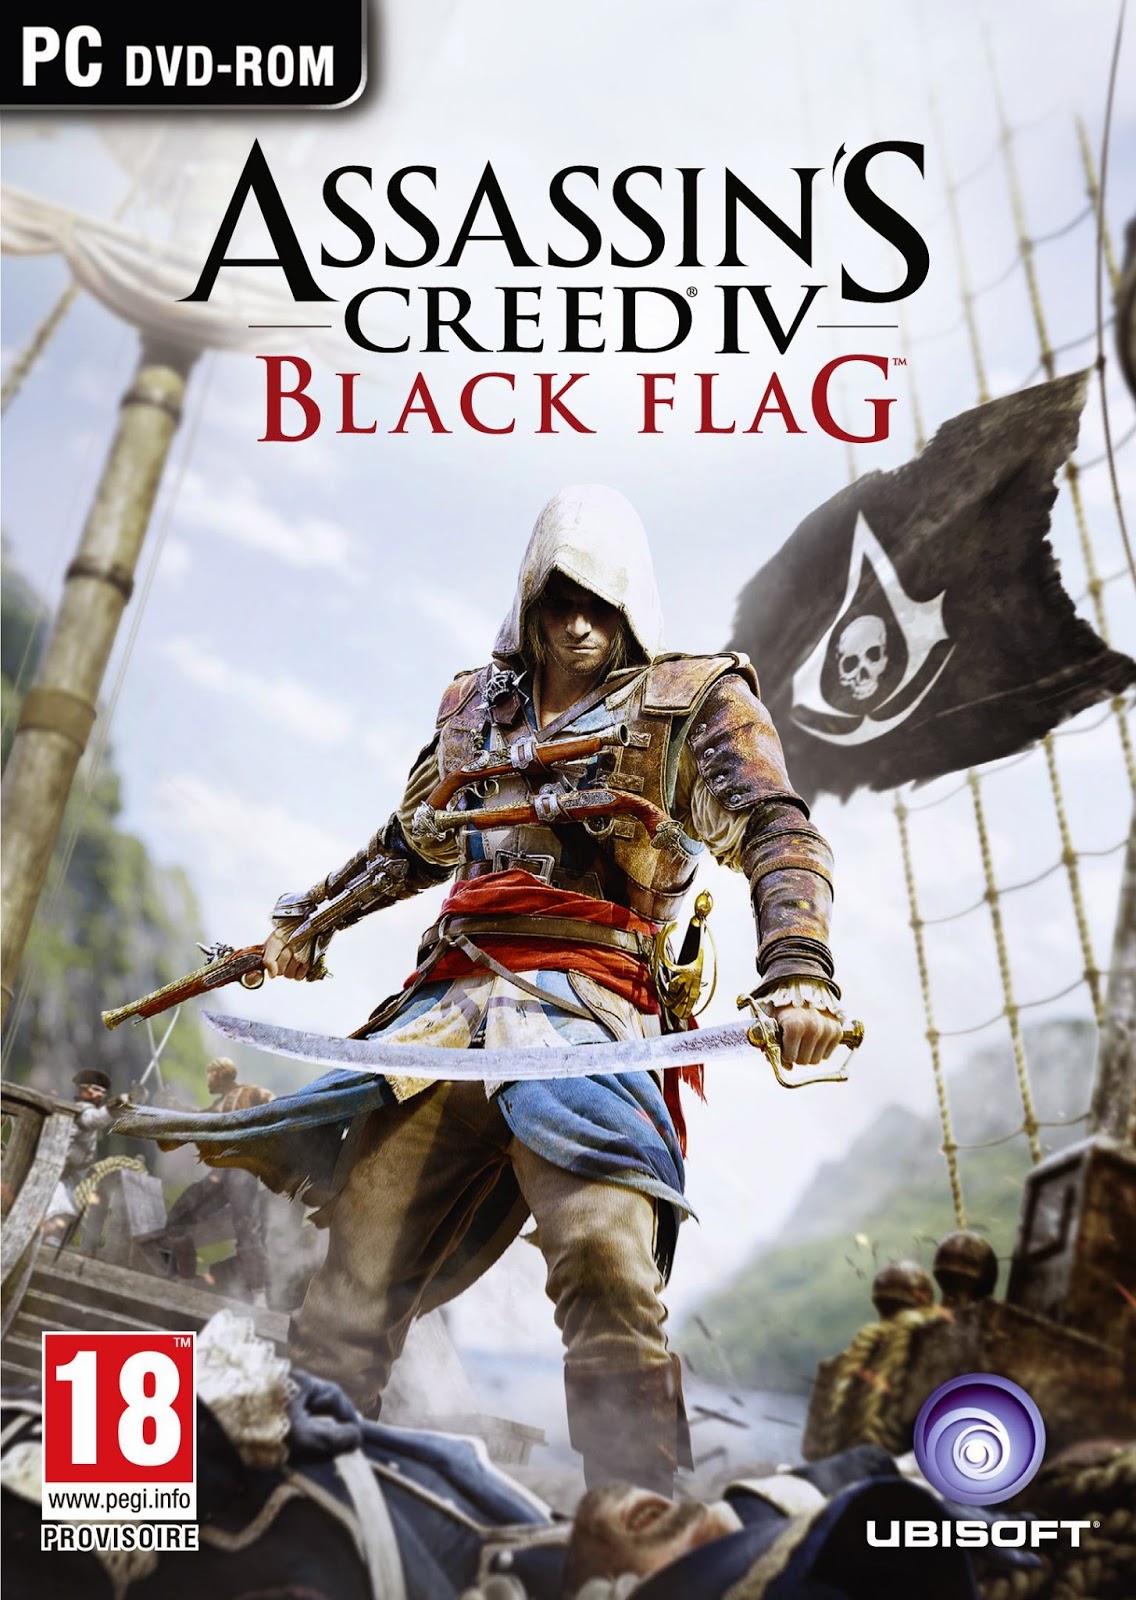 assassins creed 4 crack free download for pc